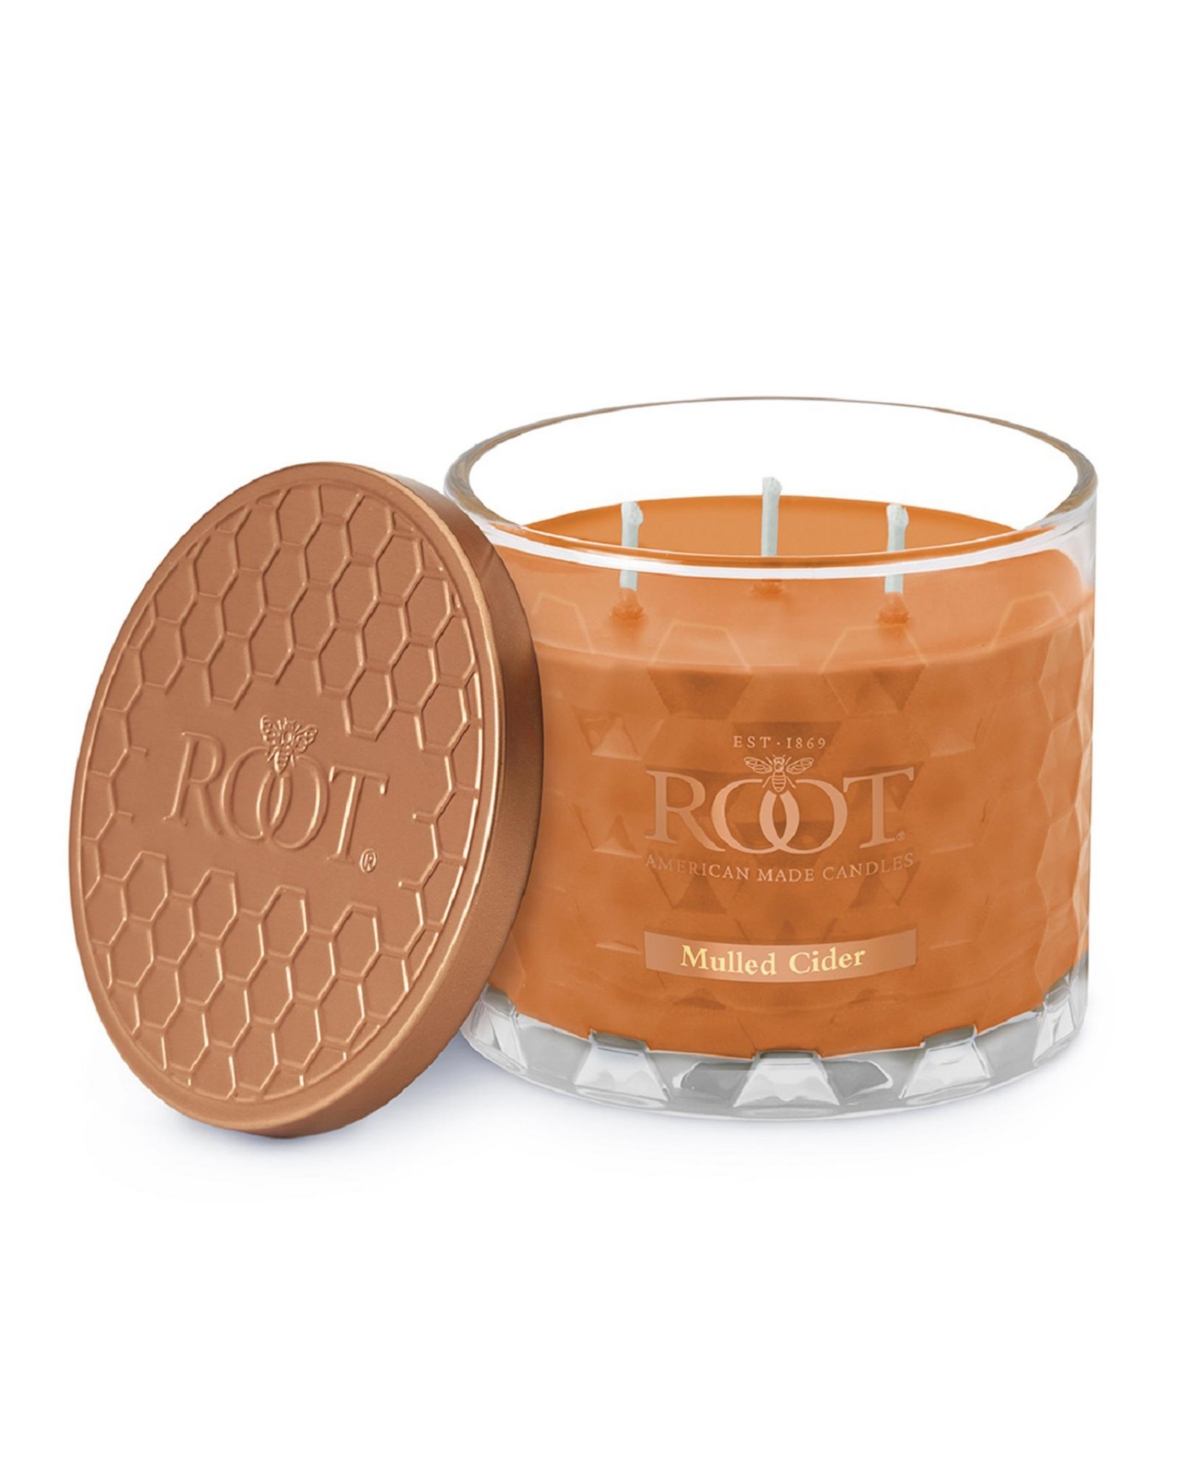 Mulled Cider Fragrance Honeycomb Glass Jar Candle - Rust